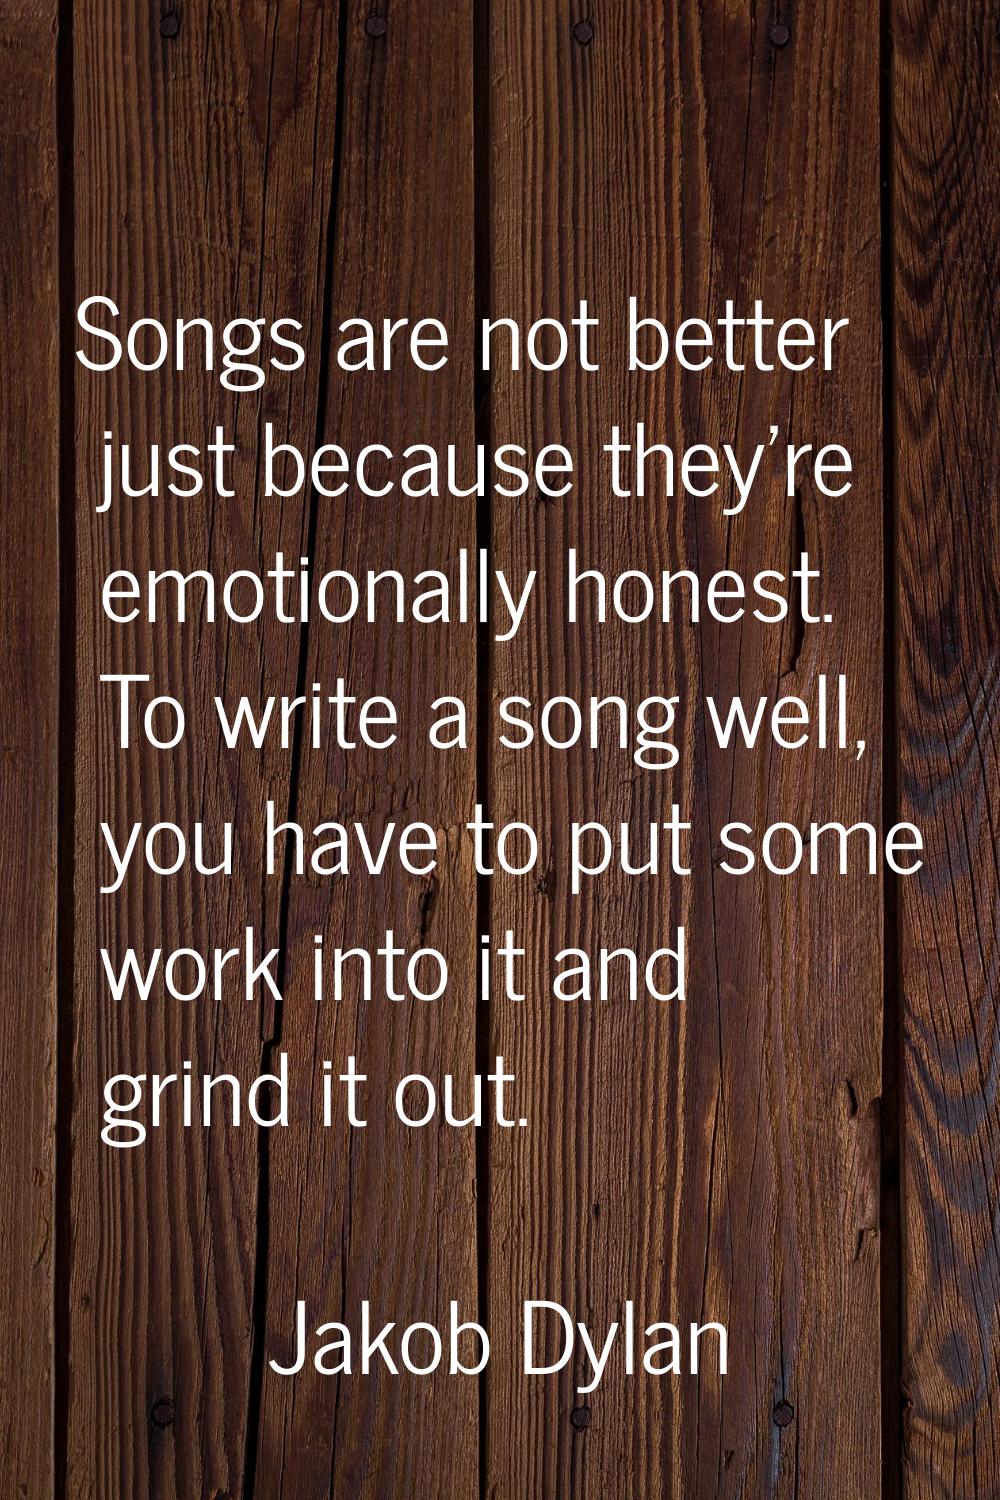 Songs are not better just because they're emotionally honest. To write a song well, you have to put